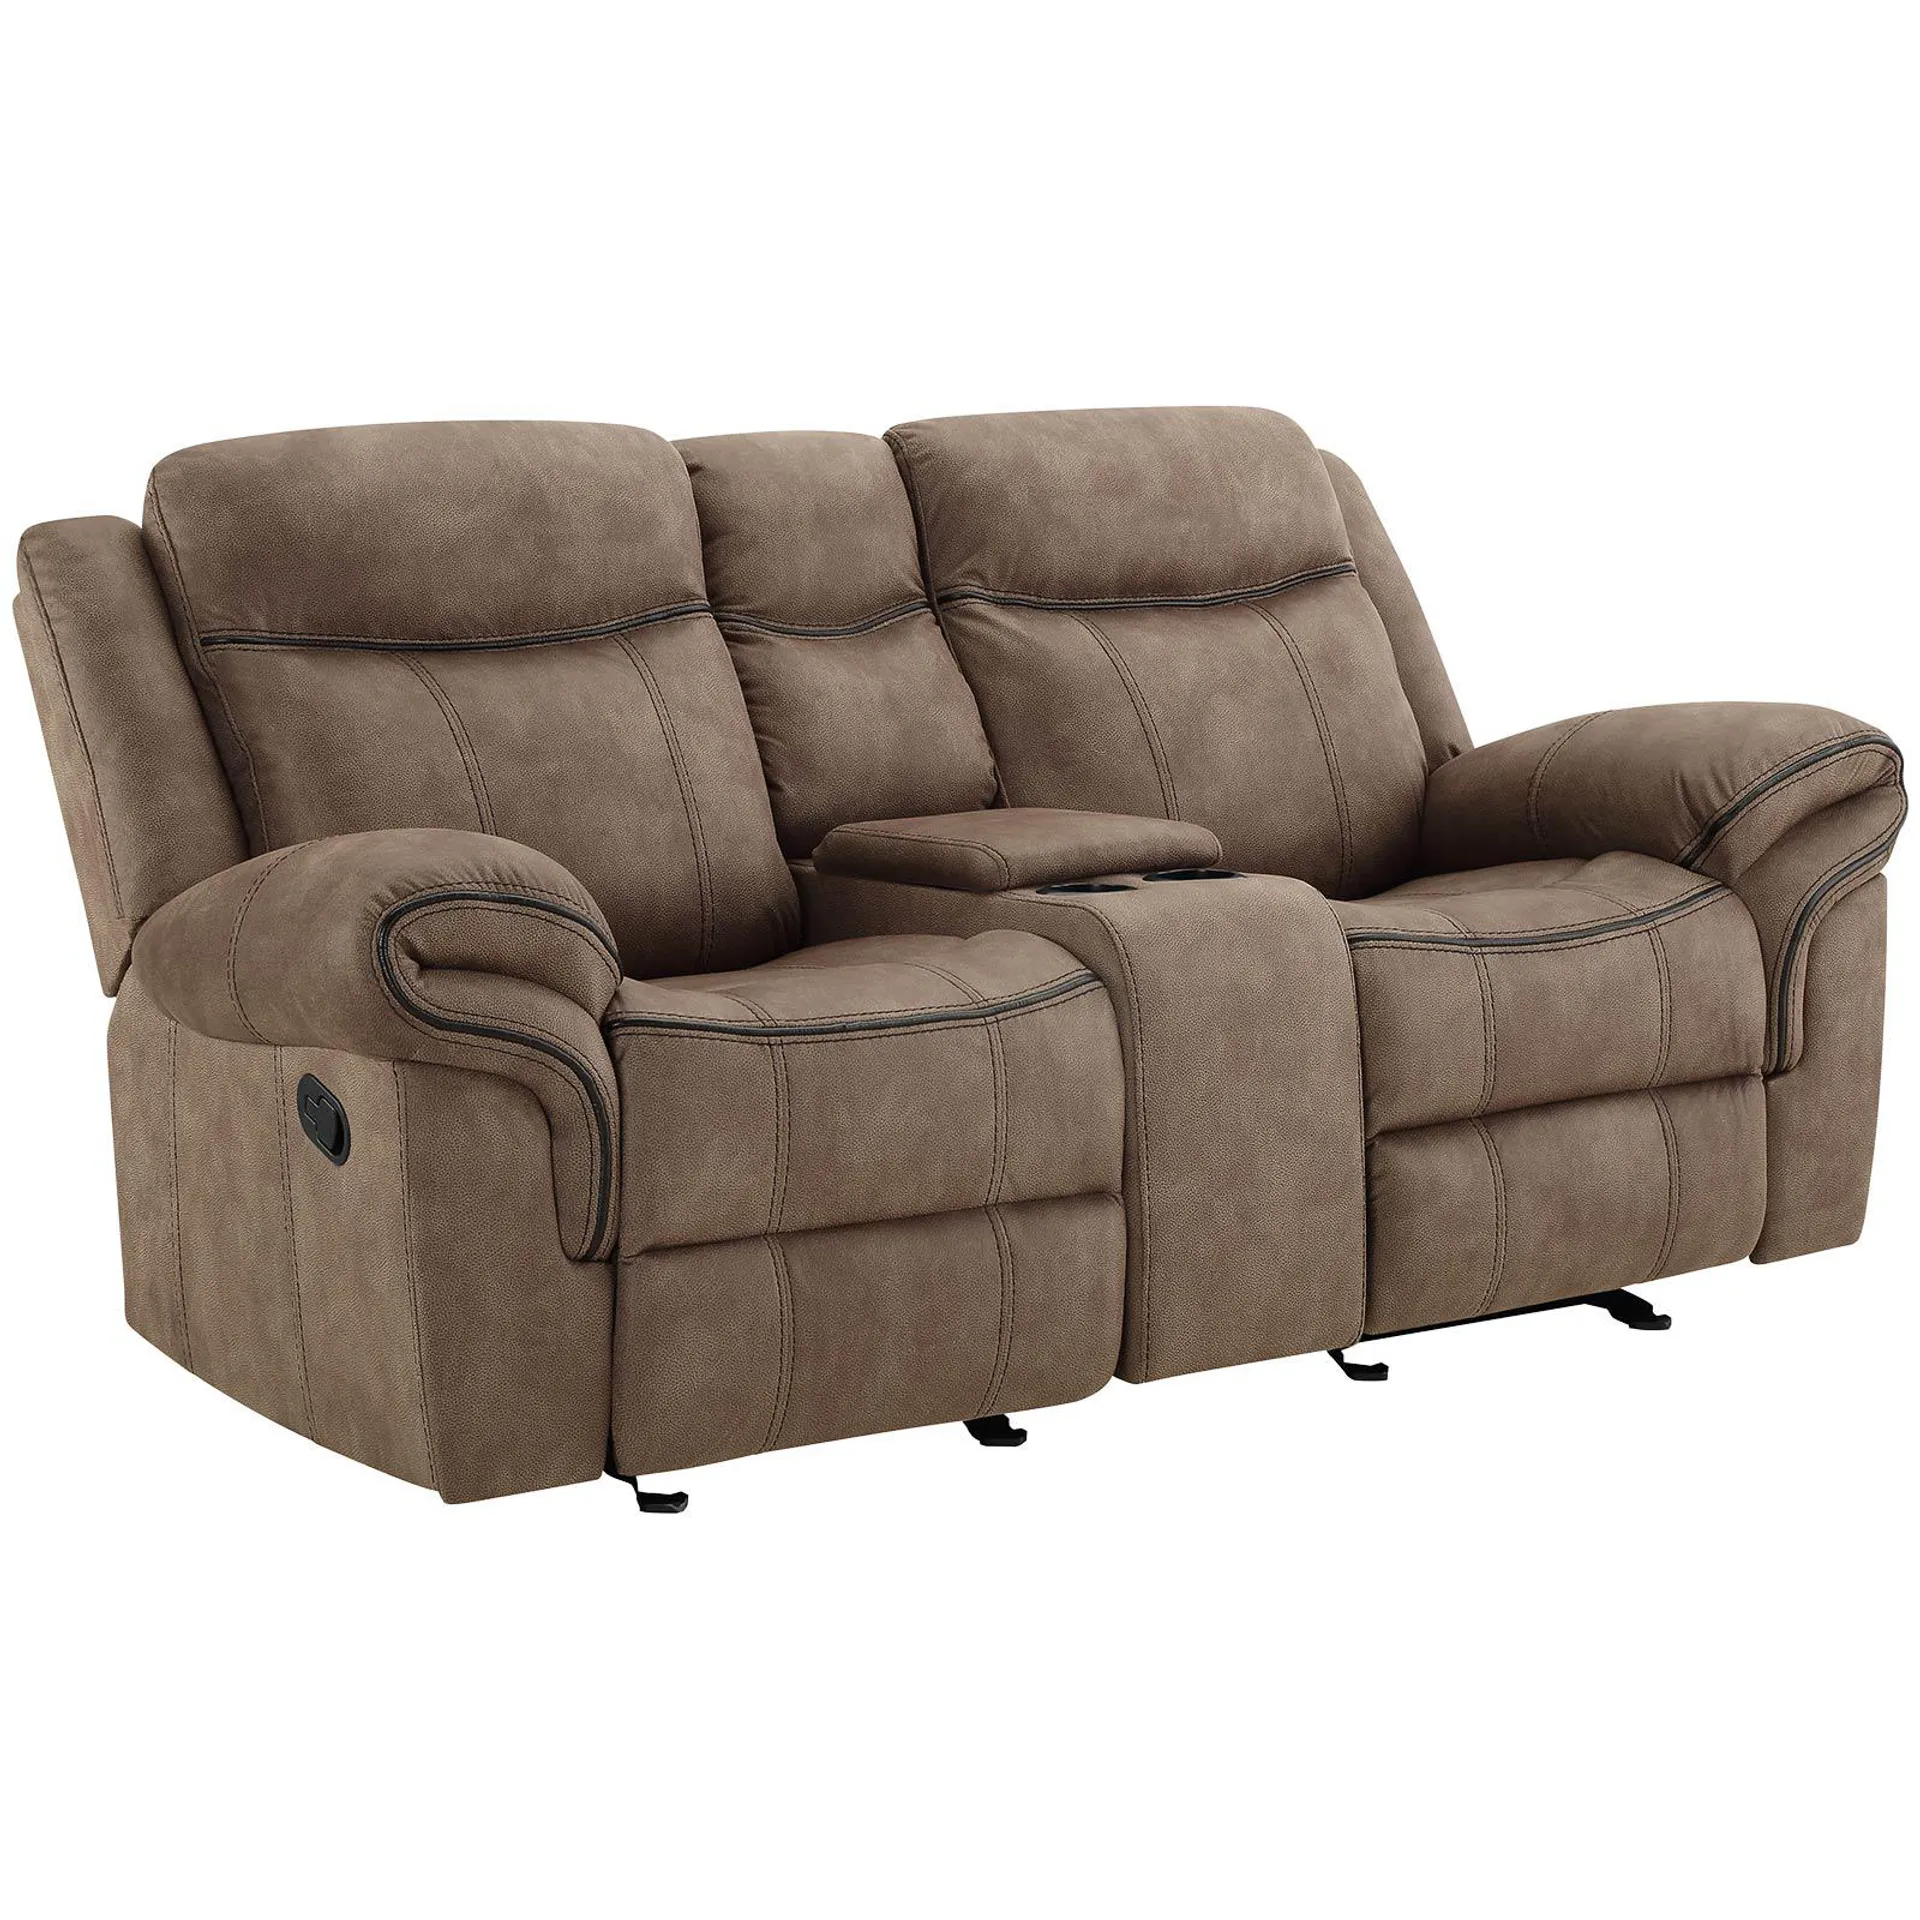 New Classic Furniture Harley Dual Reclining Loveseat with Console Storage